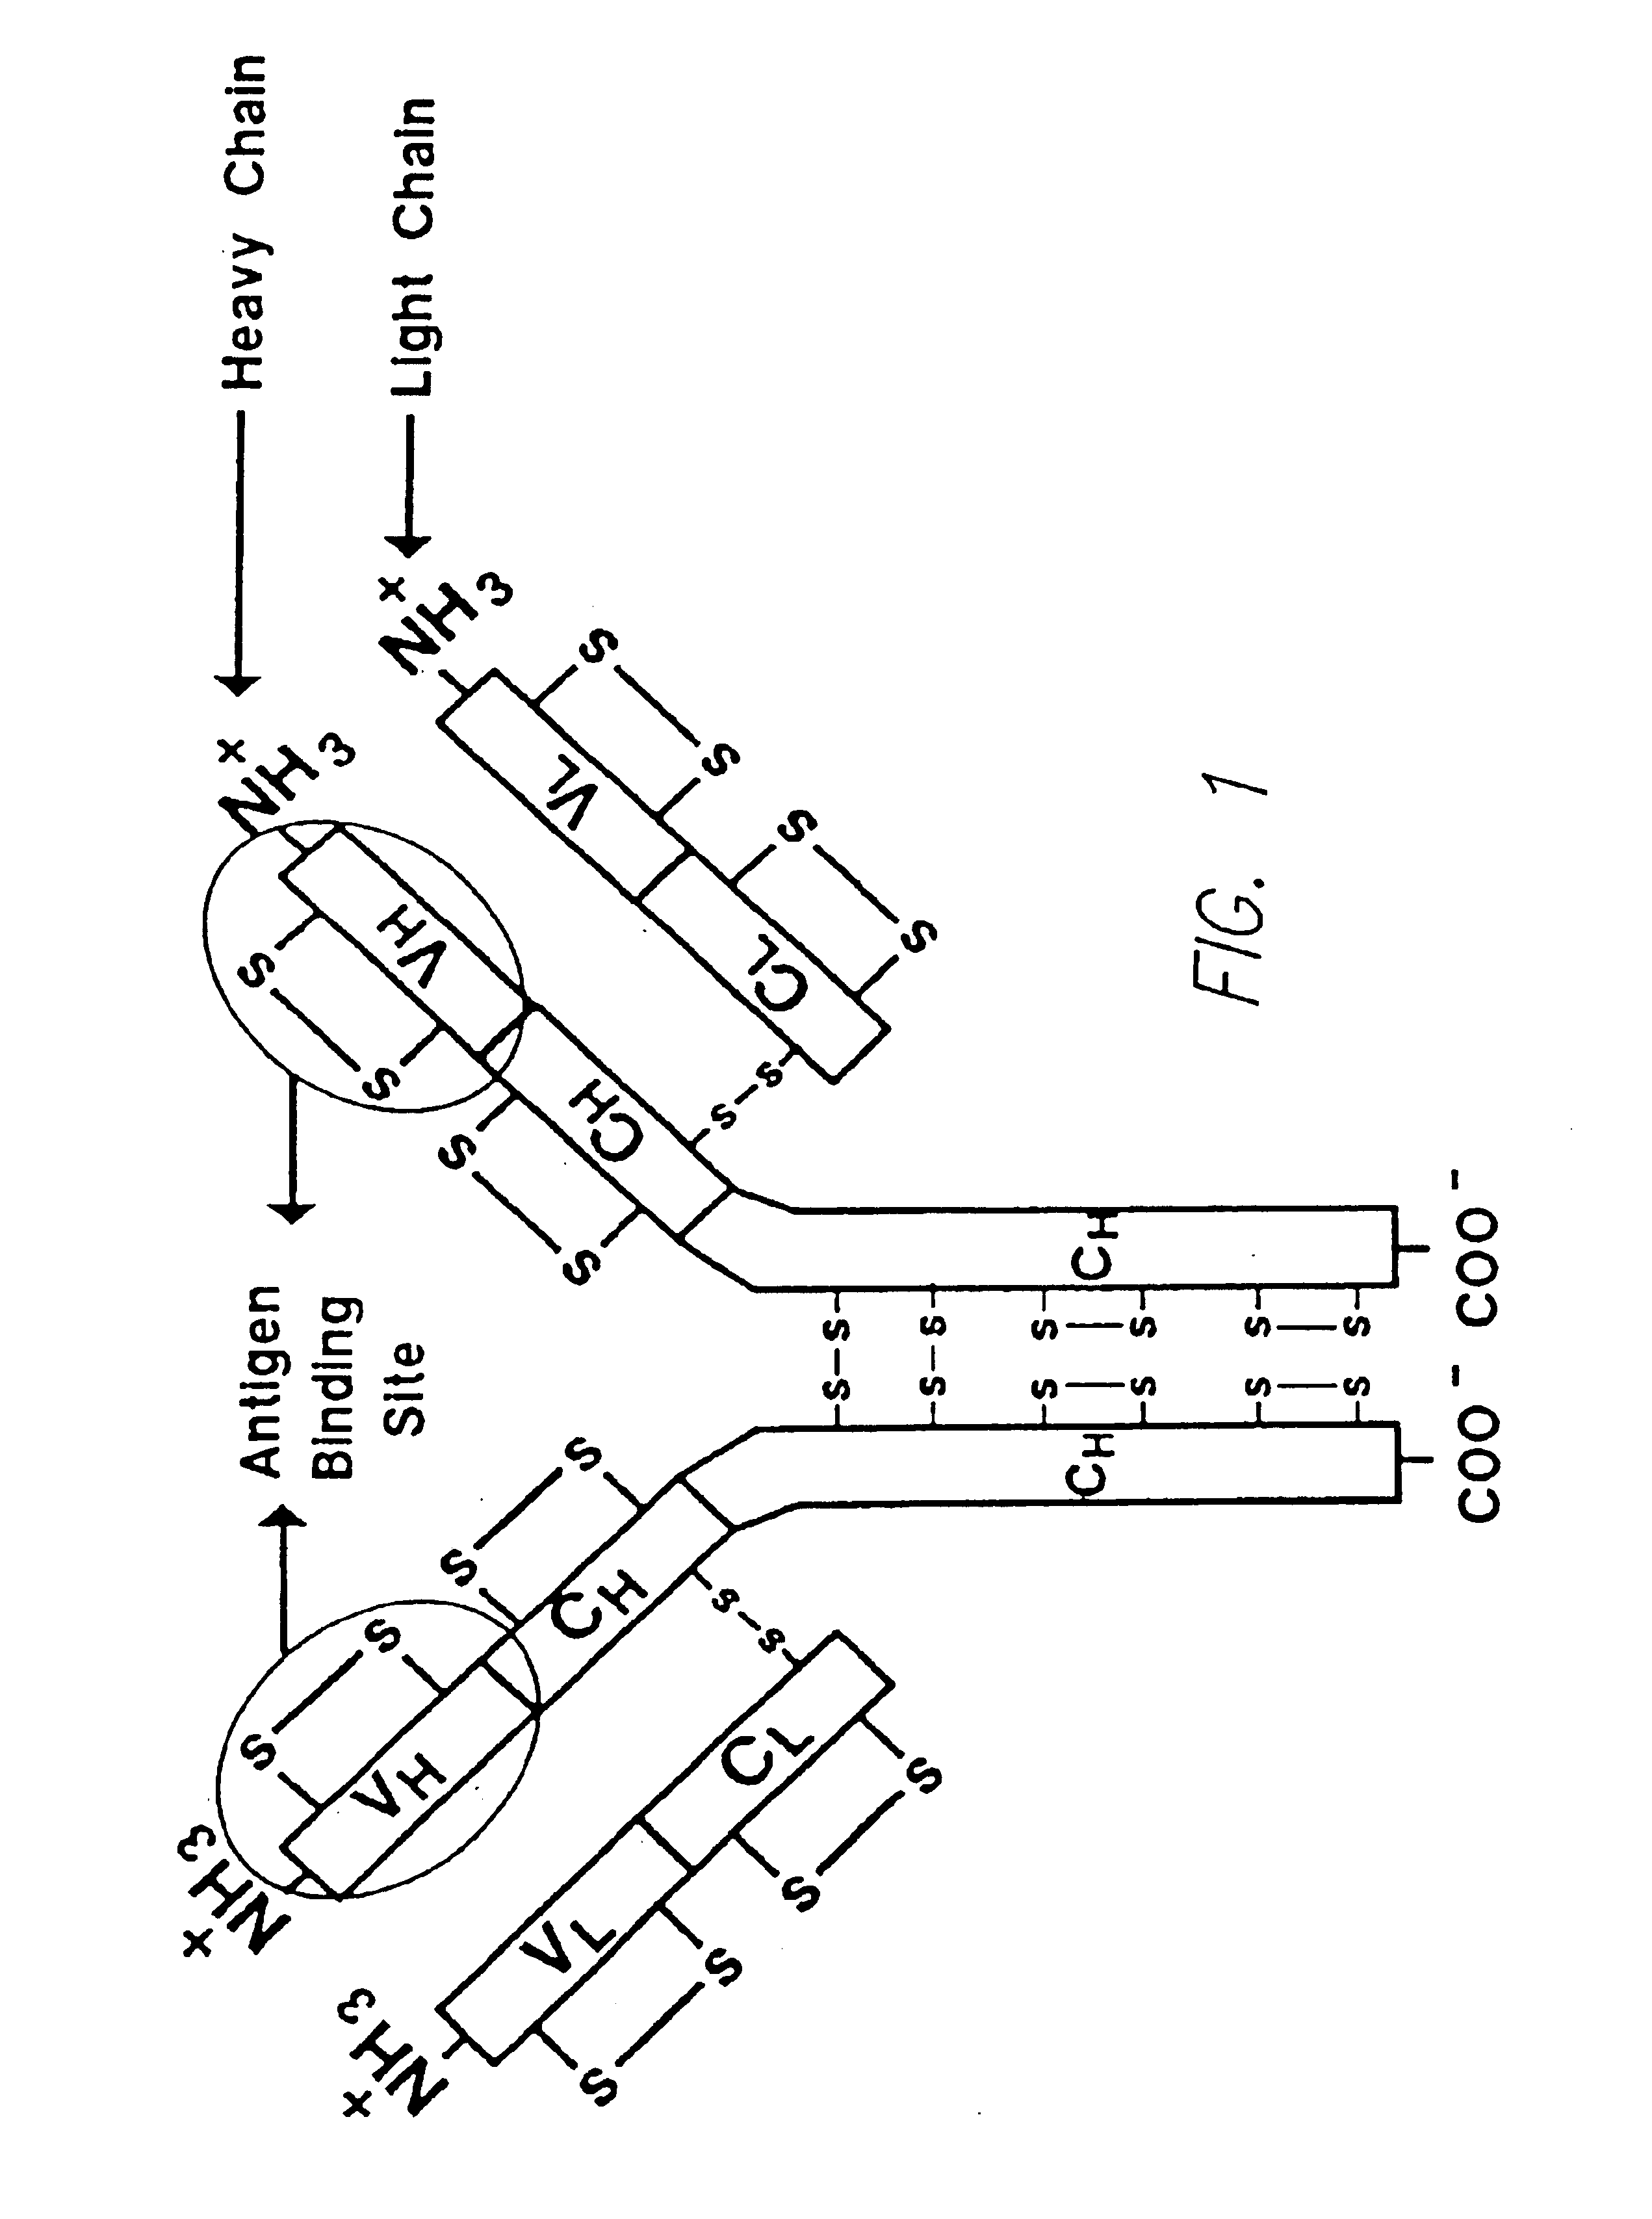 Method for tapping the immunological repertoire